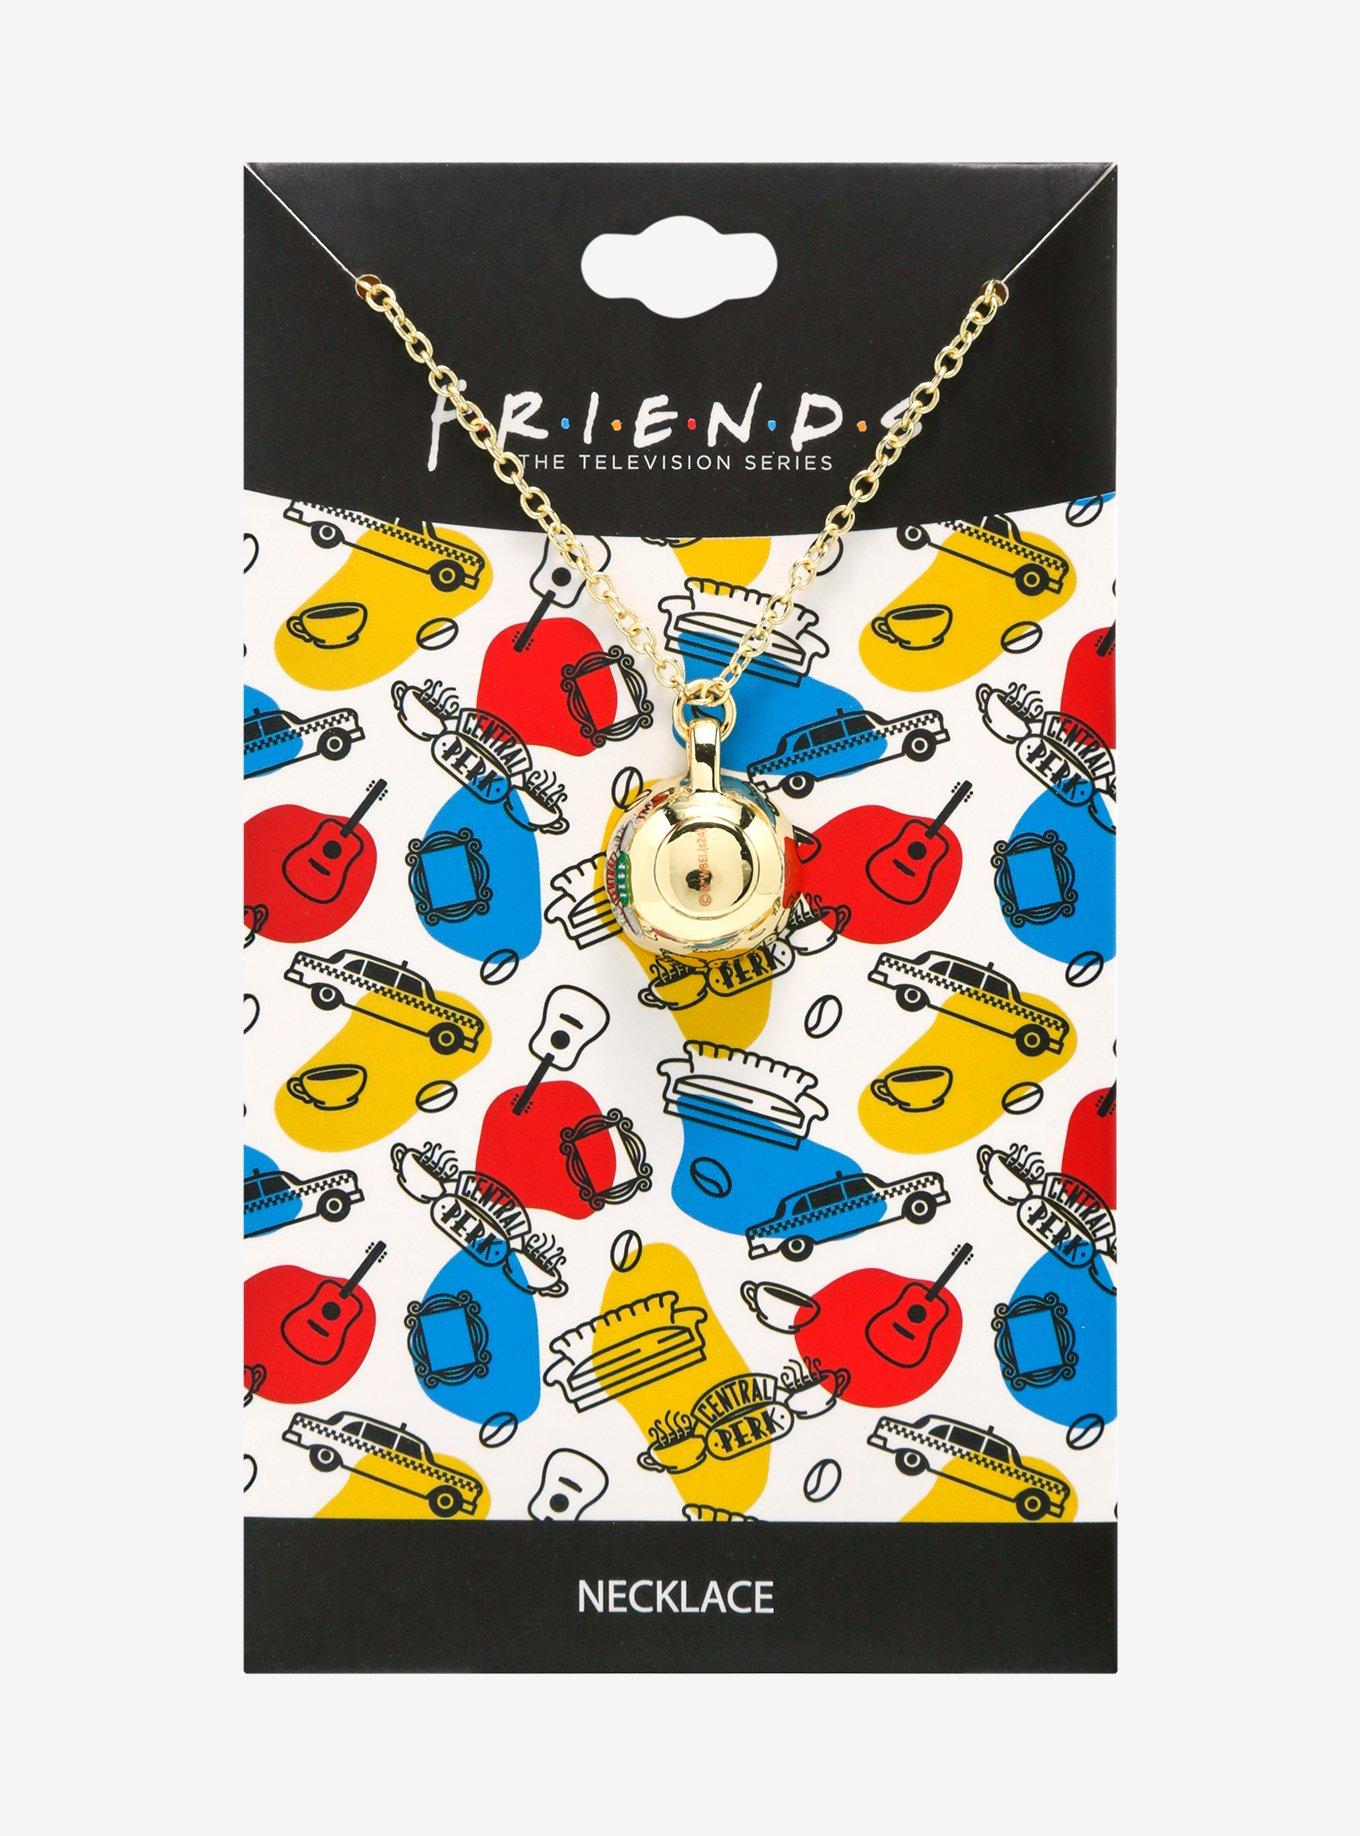 Friends Central Perk Gold Cup Necklace